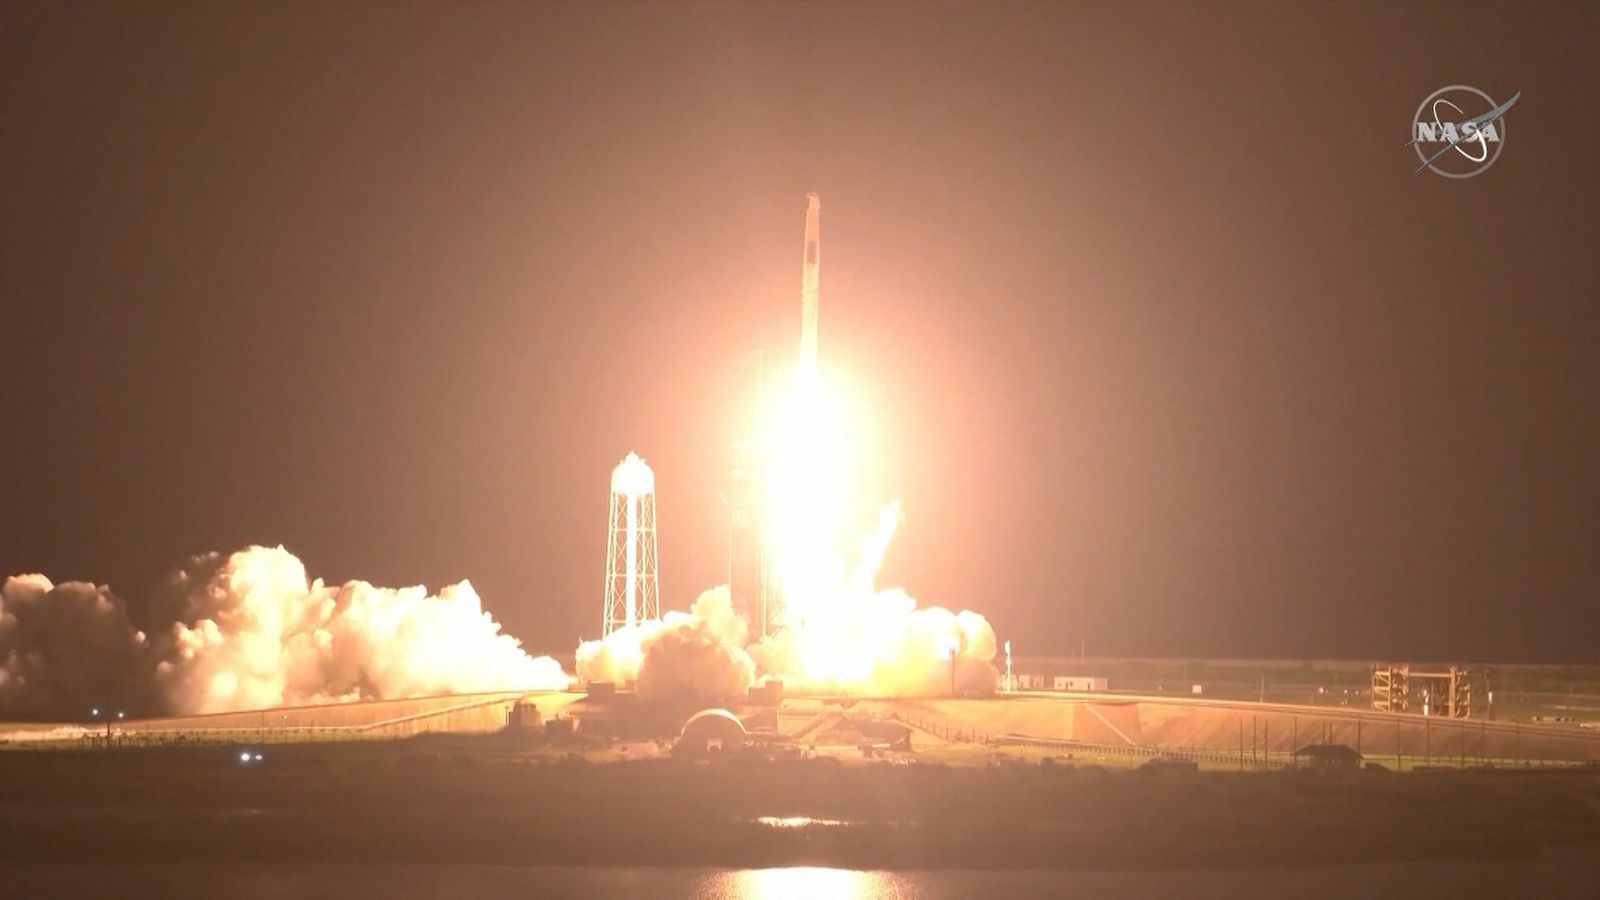 SpaceX’s new mission to the International Space Station (ISS) begins